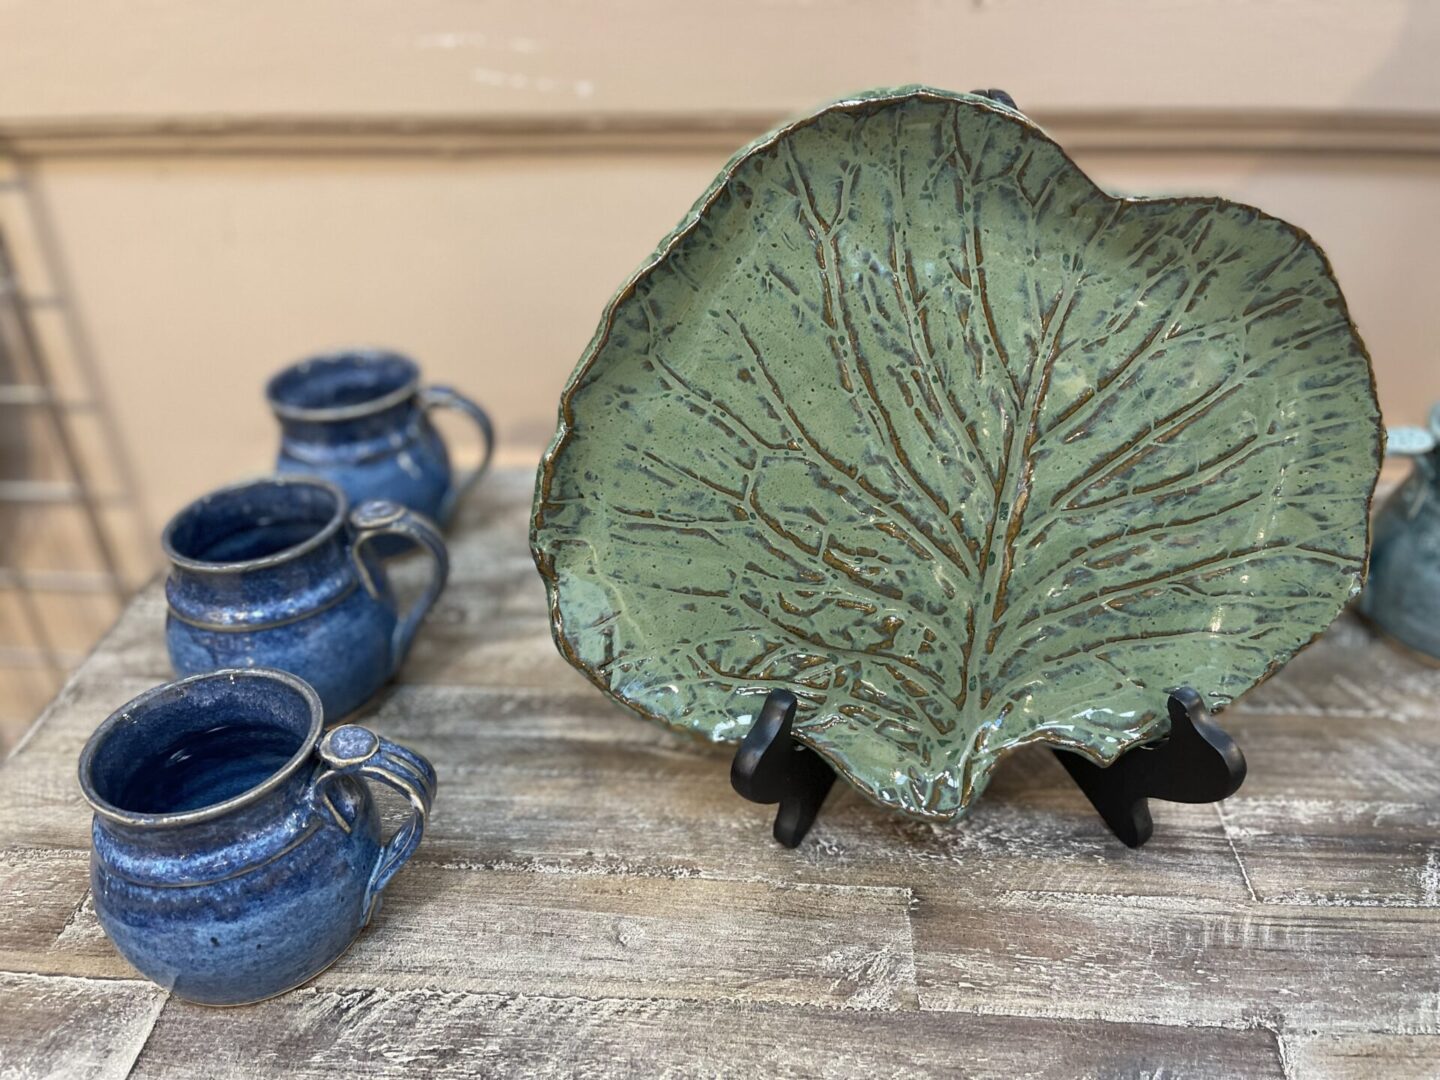 A set of mugs and a plate with a leaf on it.